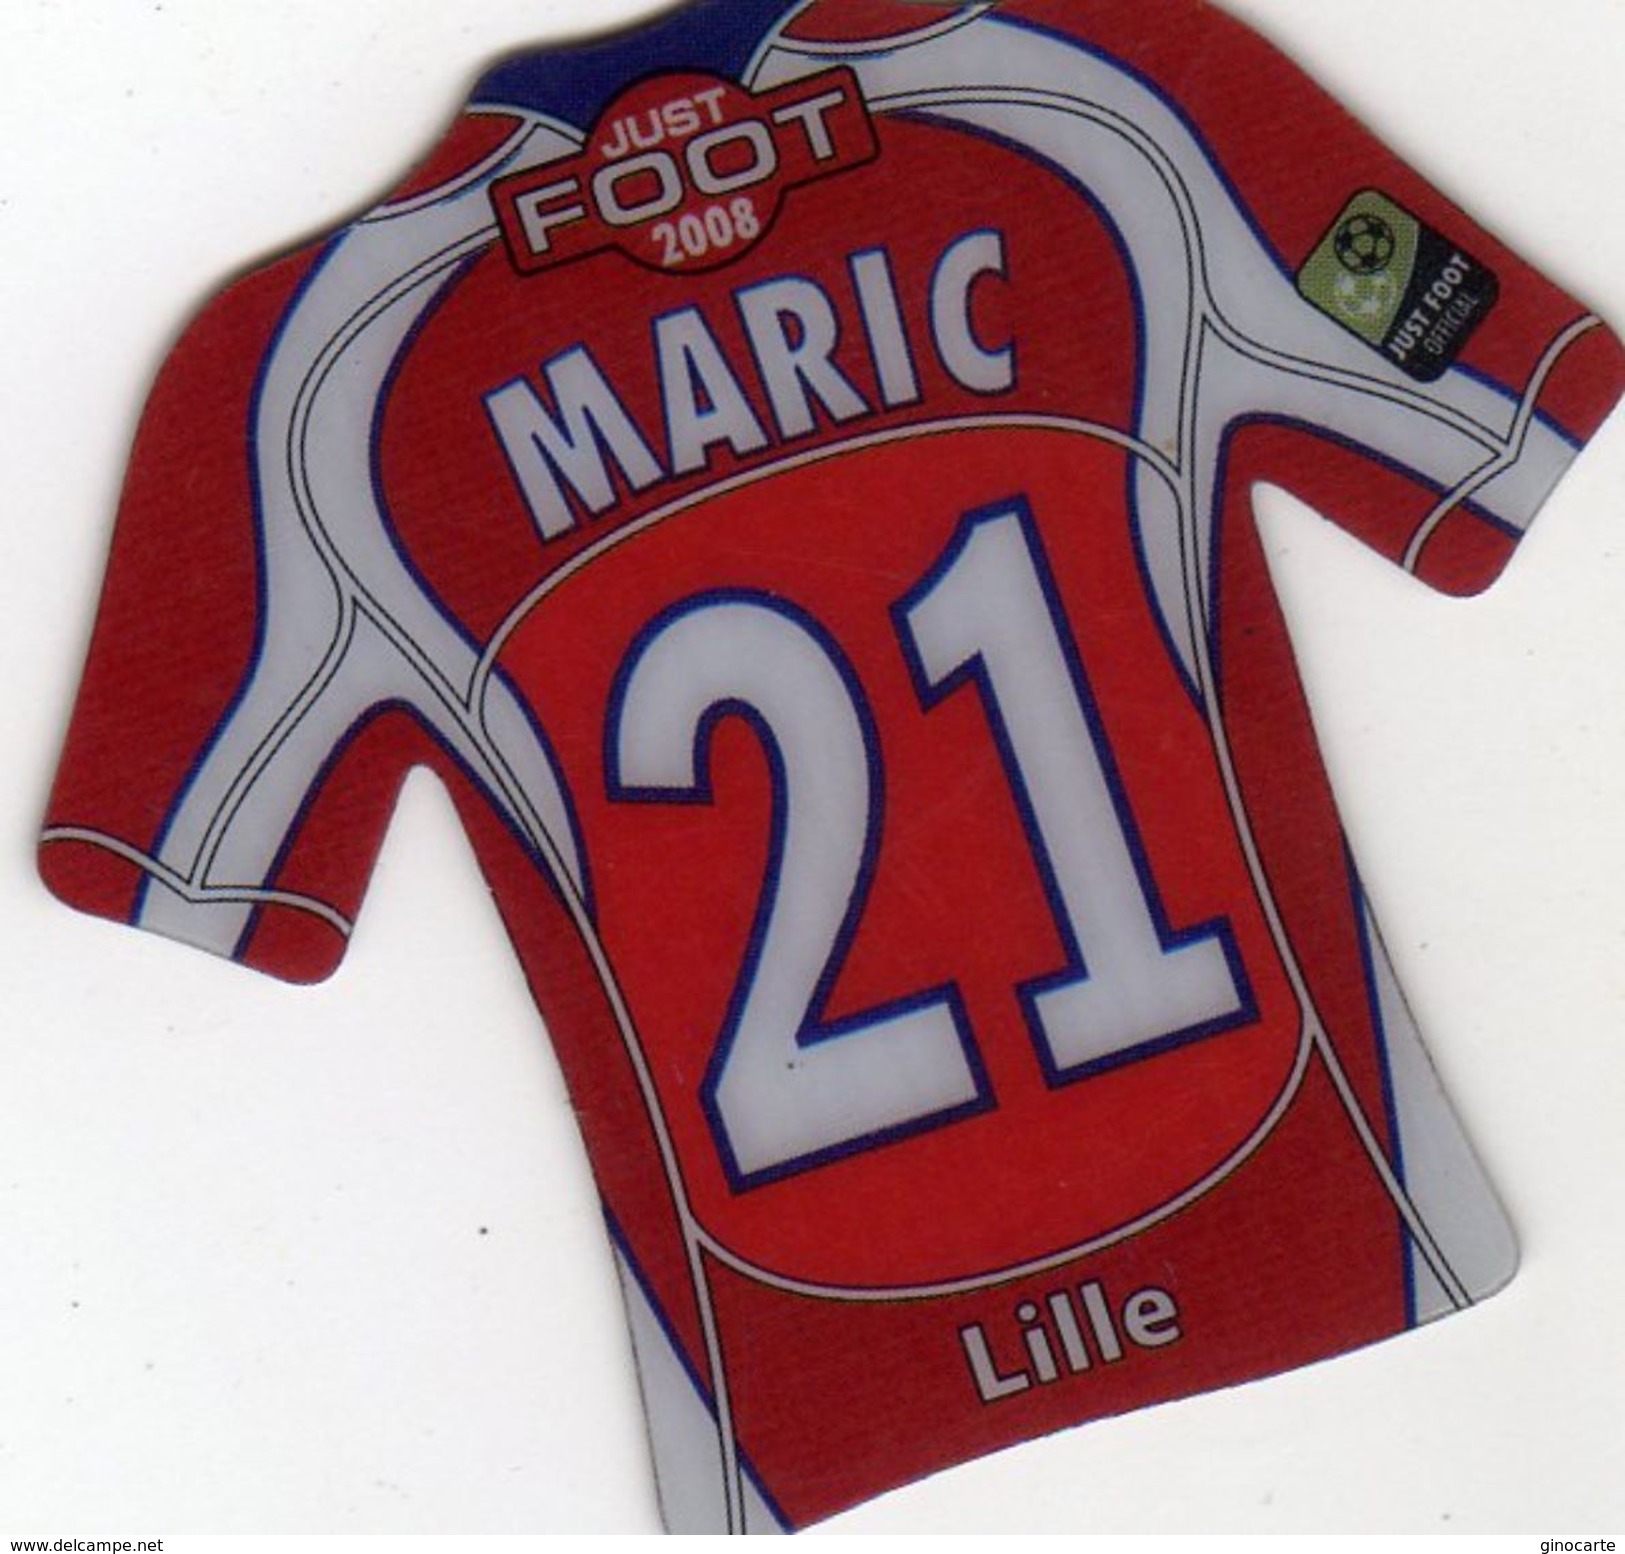 Magnet Magnets Maillot De Football Pitch Lille Maric 2008 - Sports